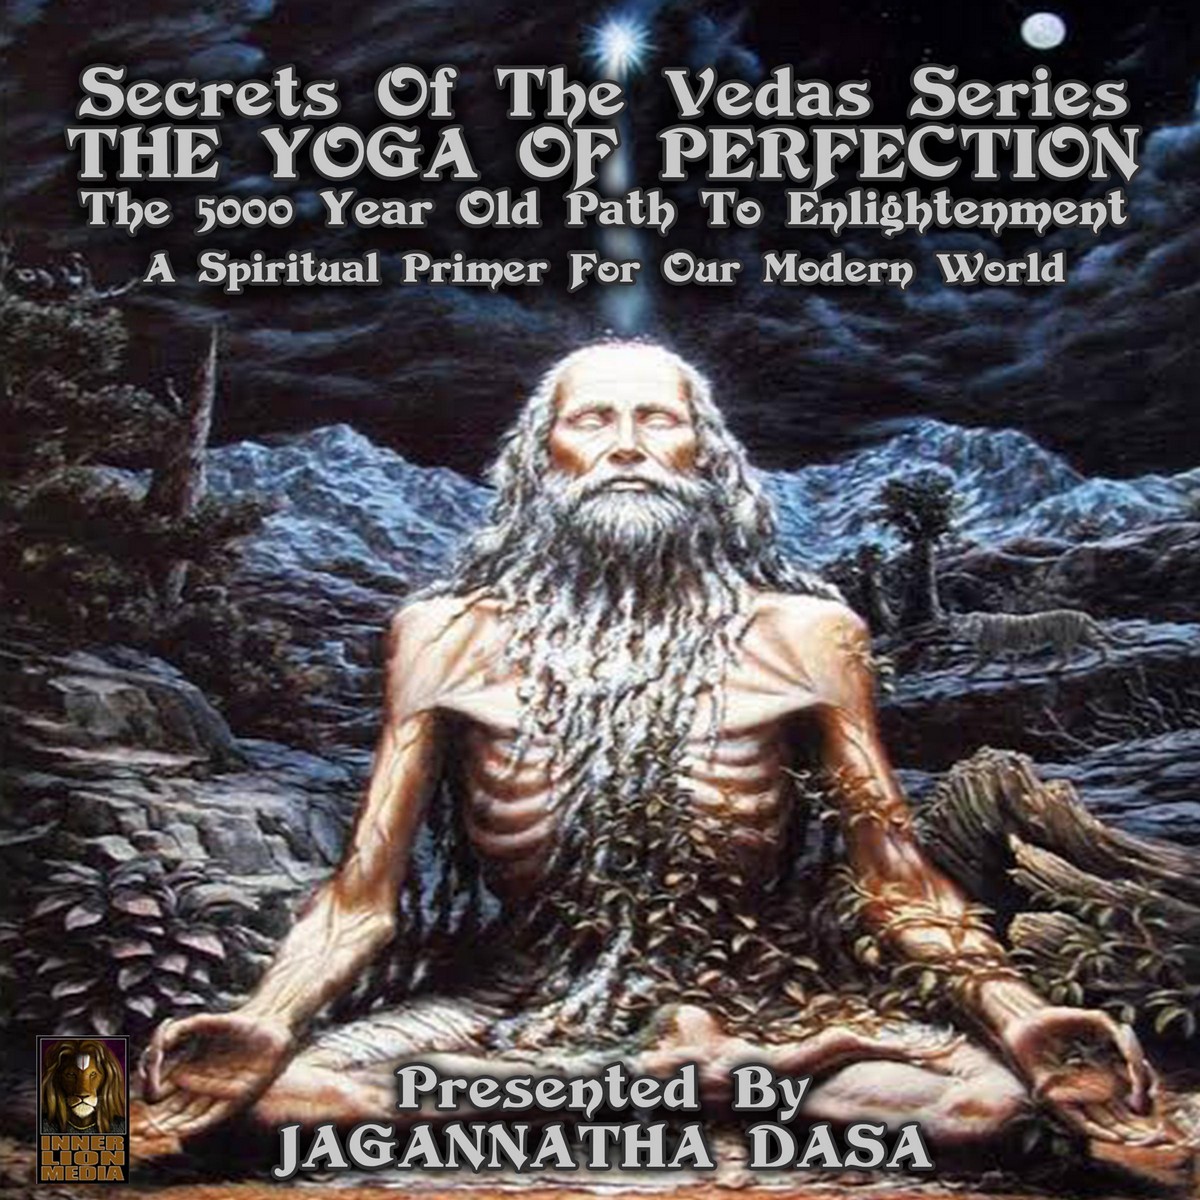 Secrets Of The Vedas Series – The Yoga Of Perfection The 5000 Year Old Path To Enlightenment – A Spiritual Primer For Our Modern World